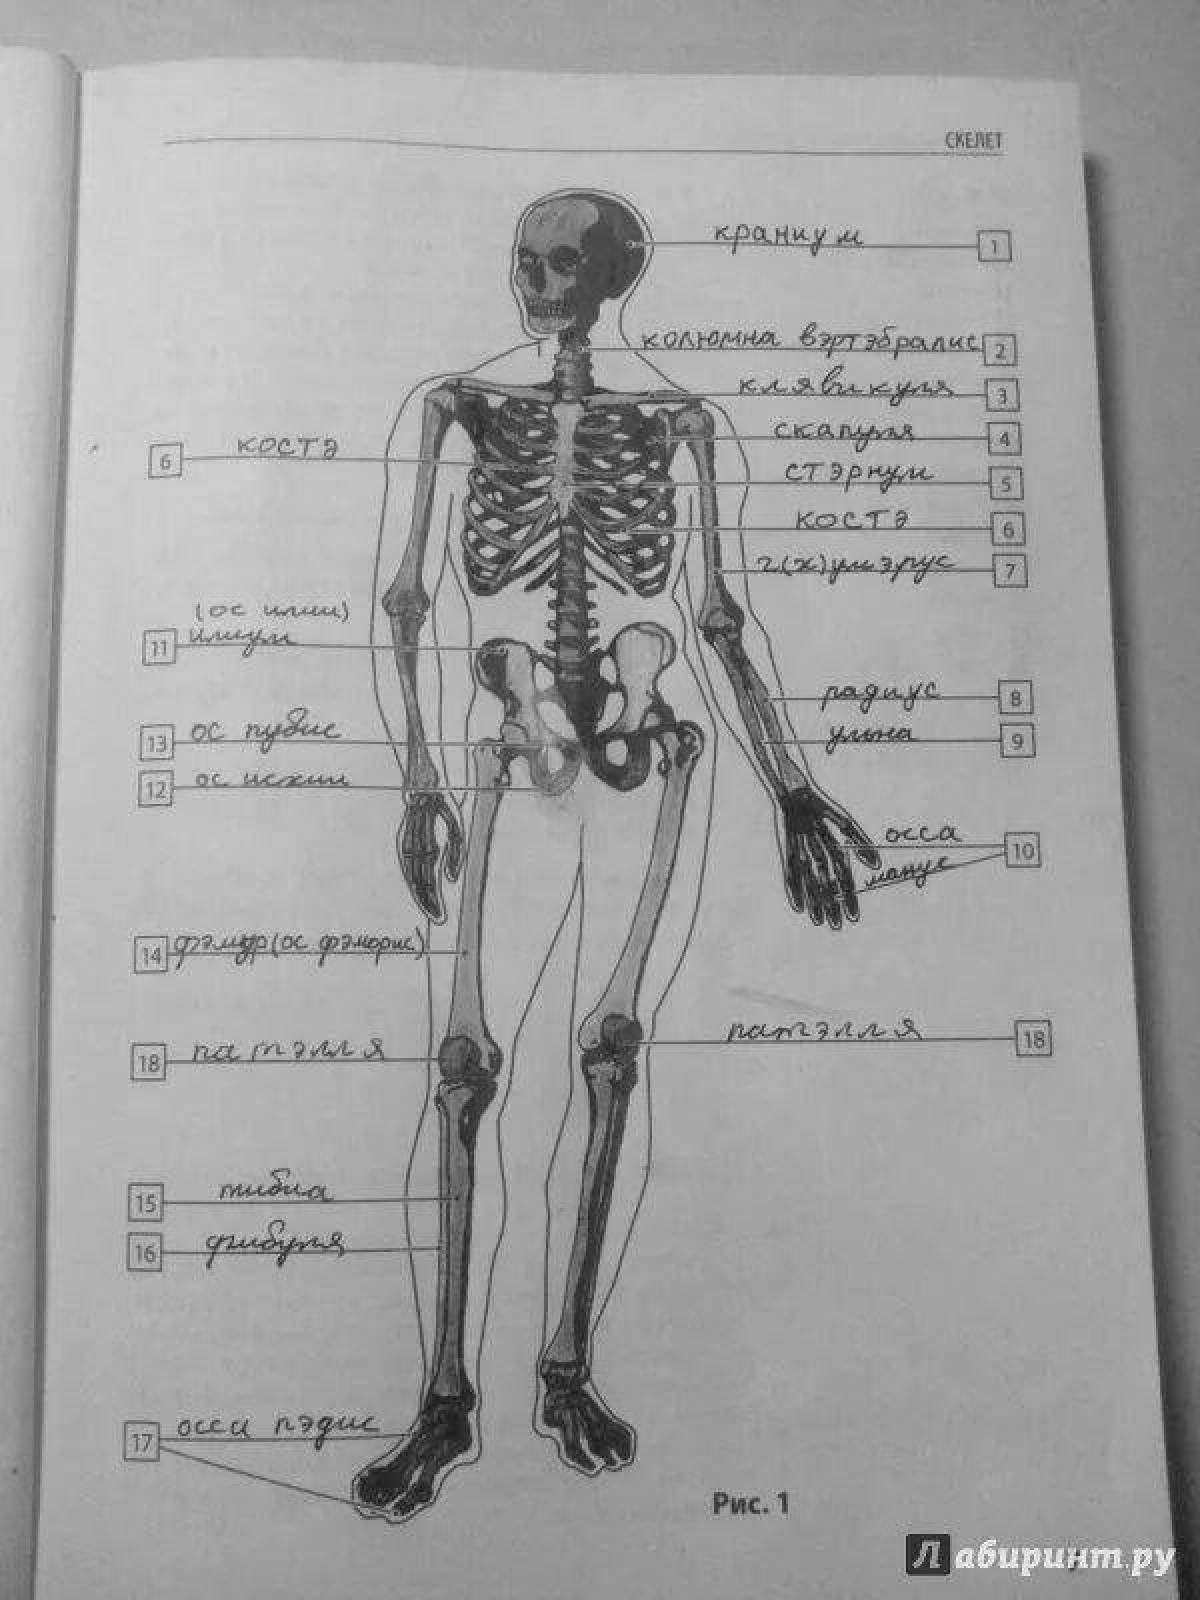 Coloring book atlas of anatomy of netter's complex